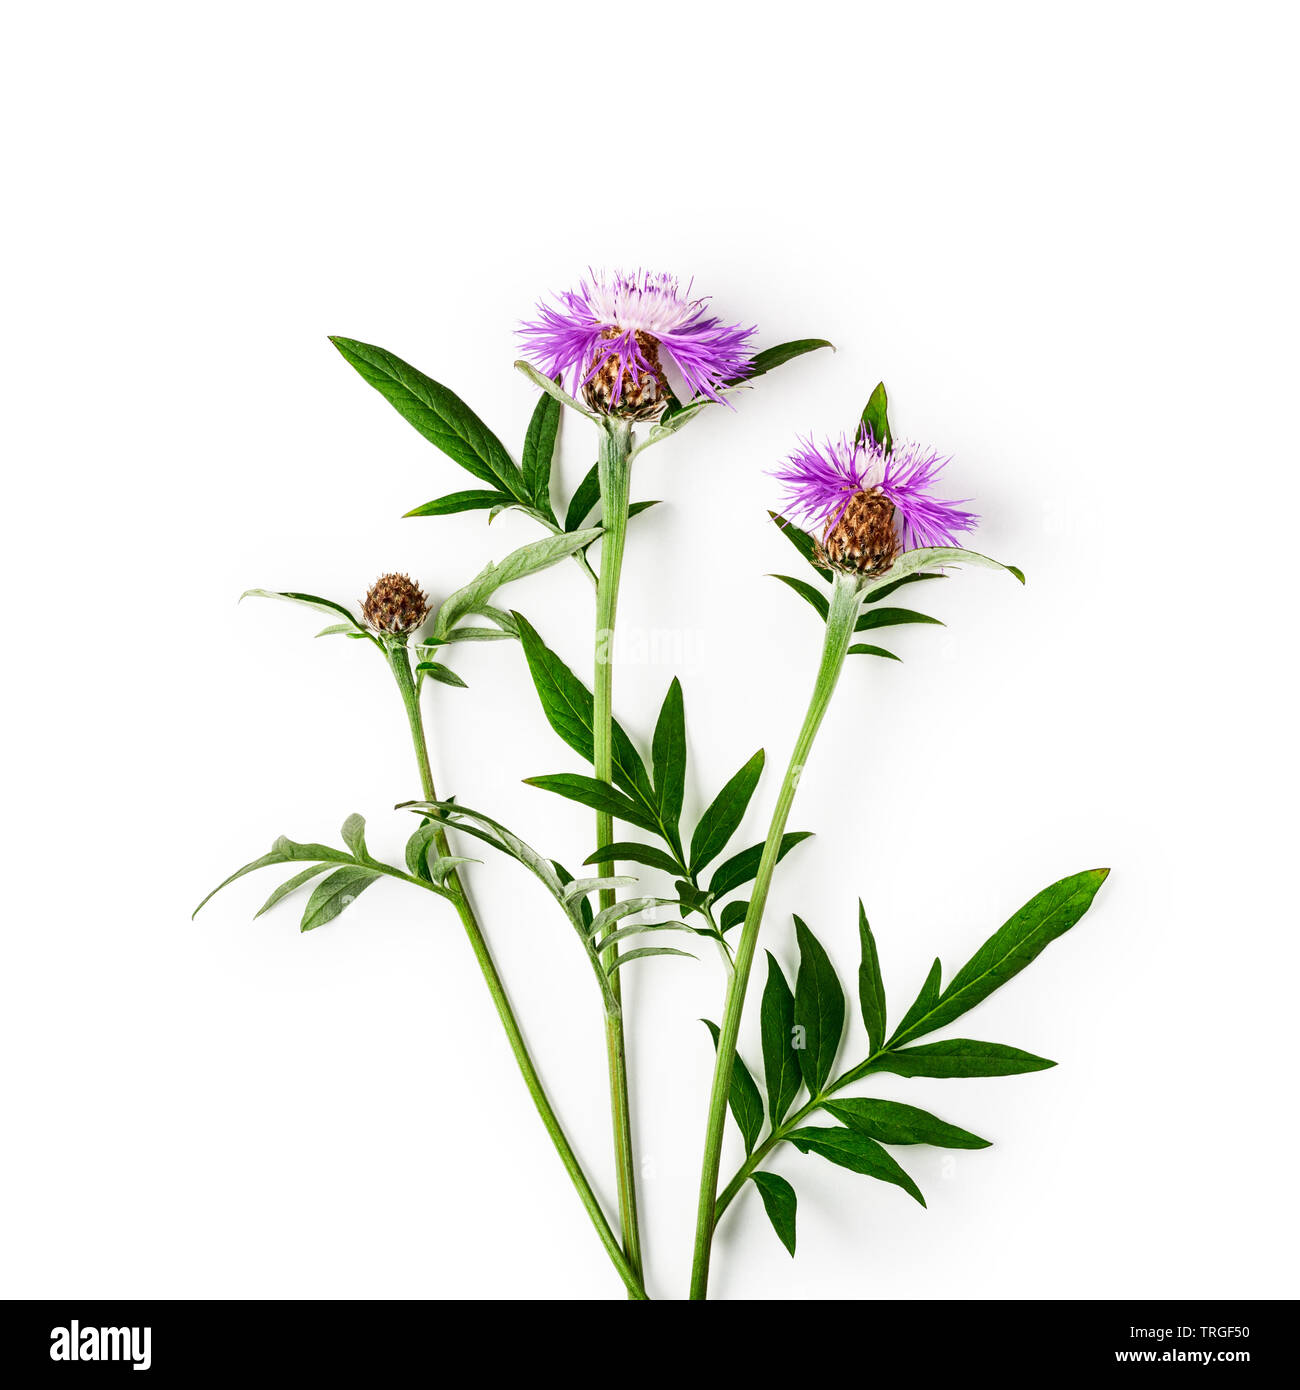 Pink centaurea knapweed flower bunch with flowers, leaves and steam. Purple cornflowers in summer garden arrangement isolated on white background with Stock Photo